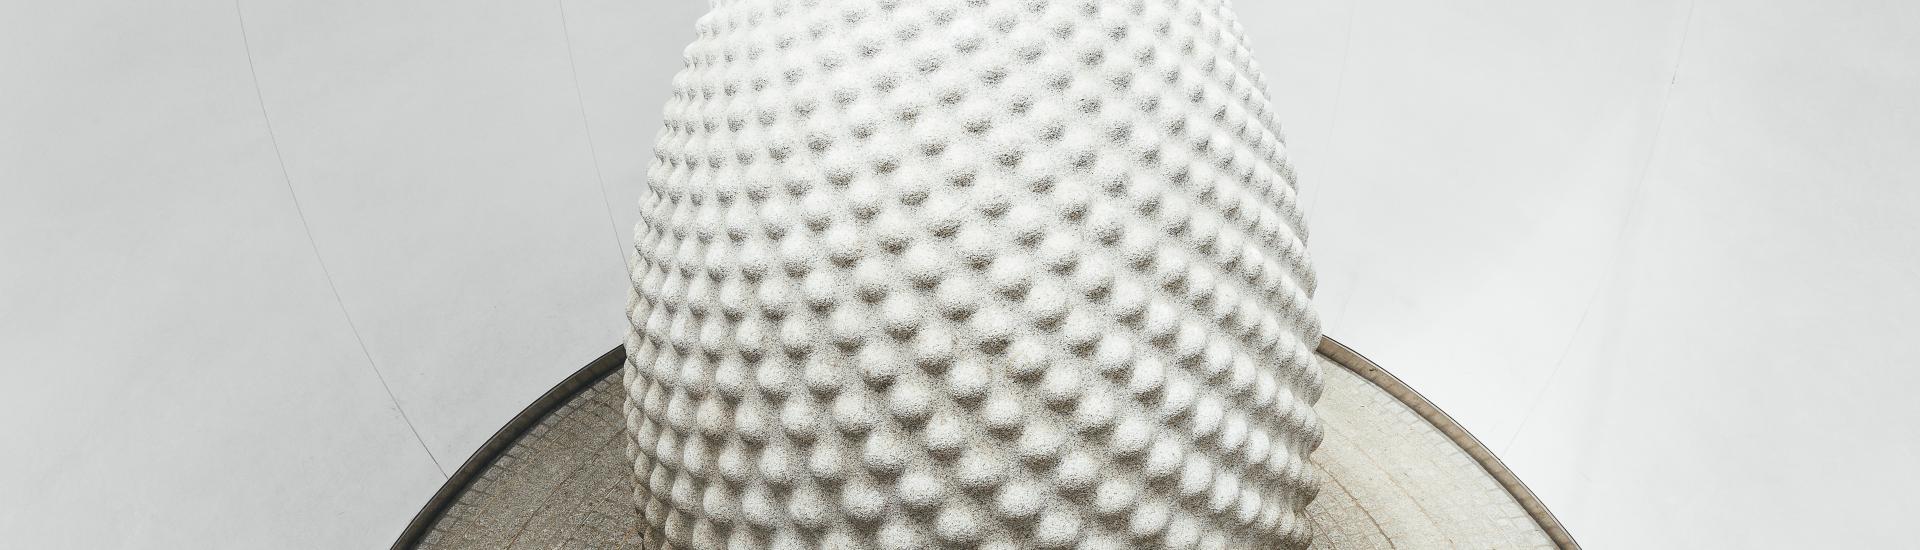 A view of the seed sculpture from above looking down. The seed is a round egg shape with raised dots on the surface